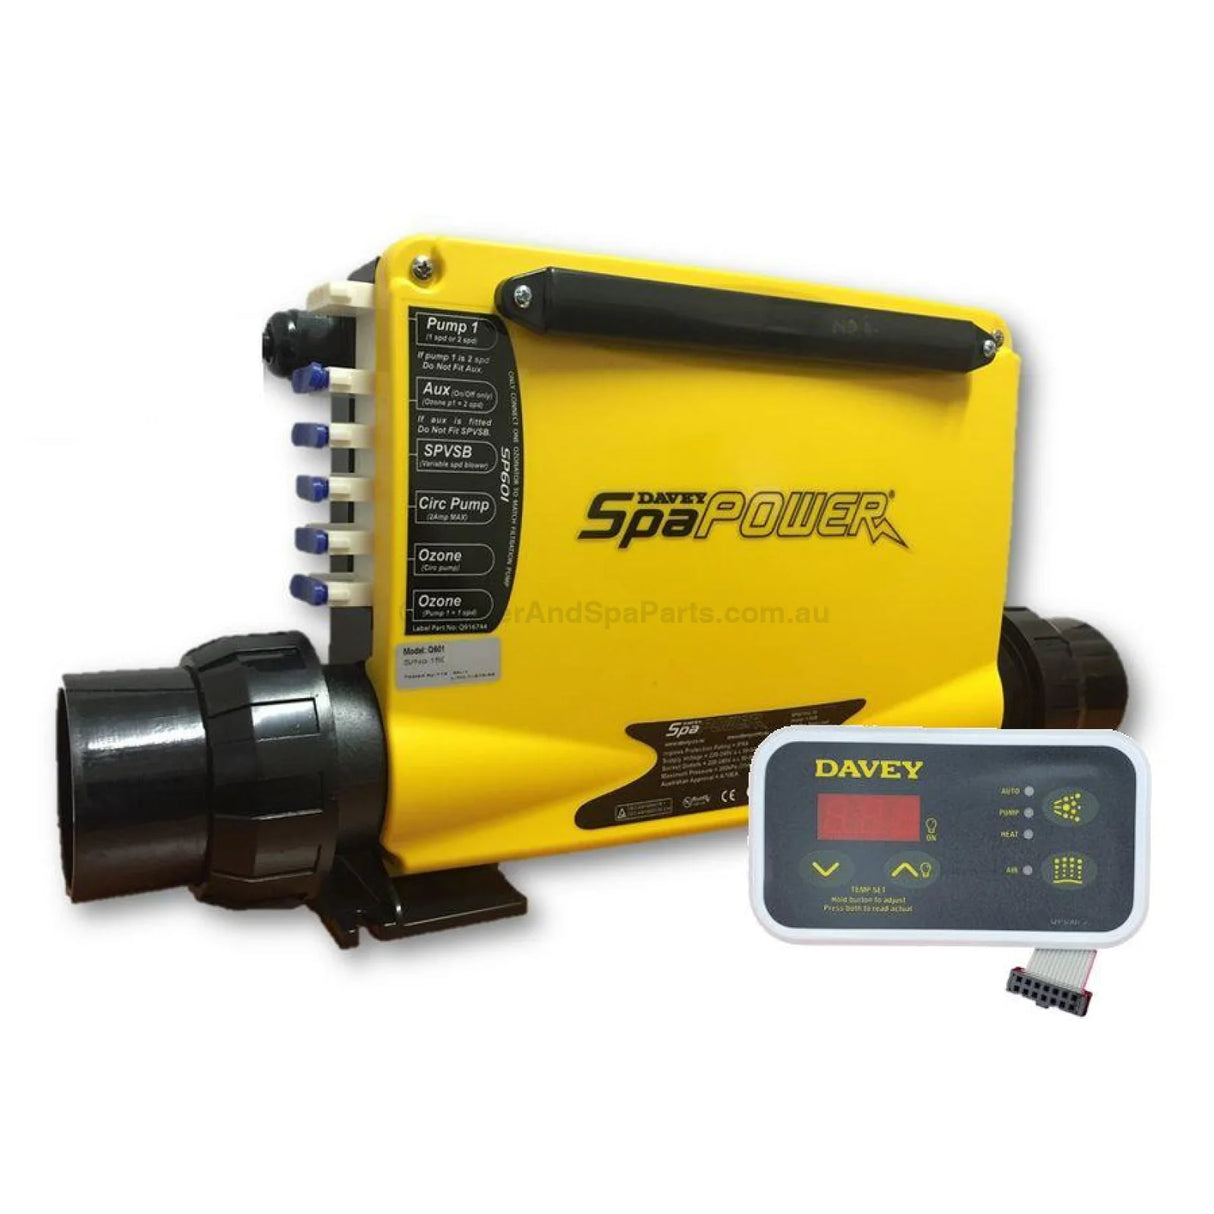 Davey Spaquip Spapower Sp 601 Spa Control System - W/ Timer Or Without Standard No / 1.5Kw Heater